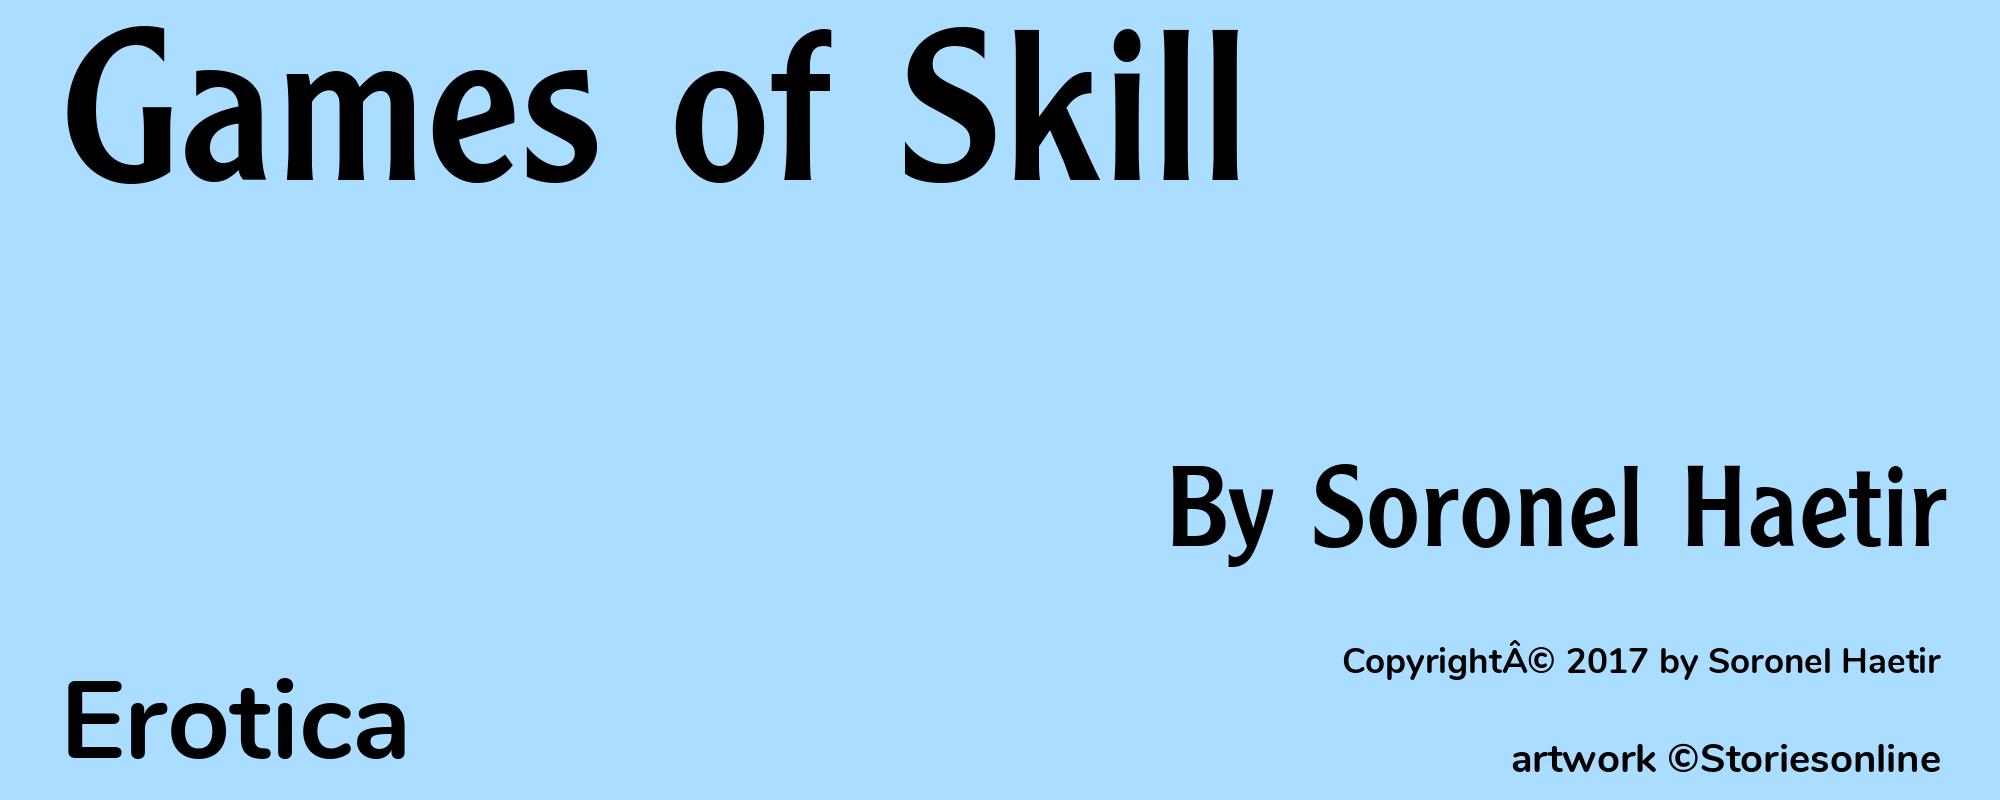 Games of Skill - Cover